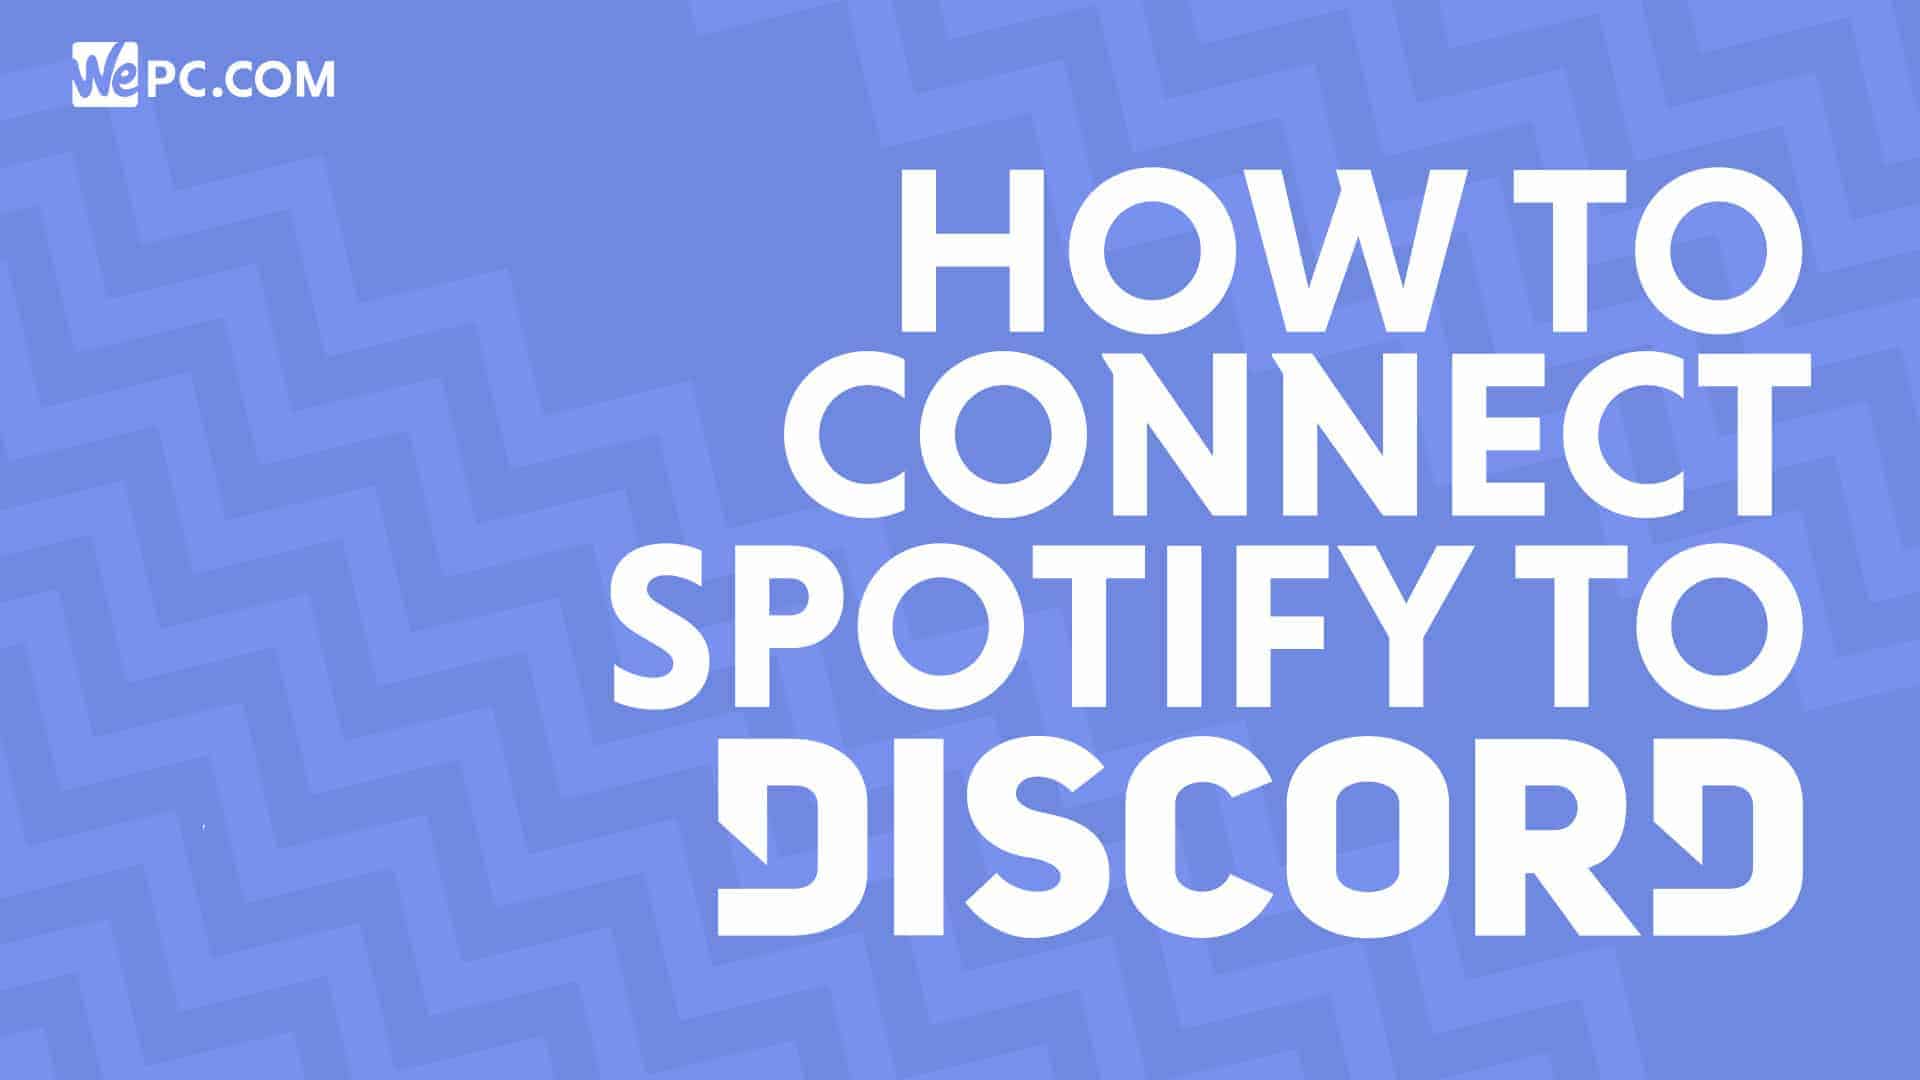 How To Connect Spotify To Your Discord